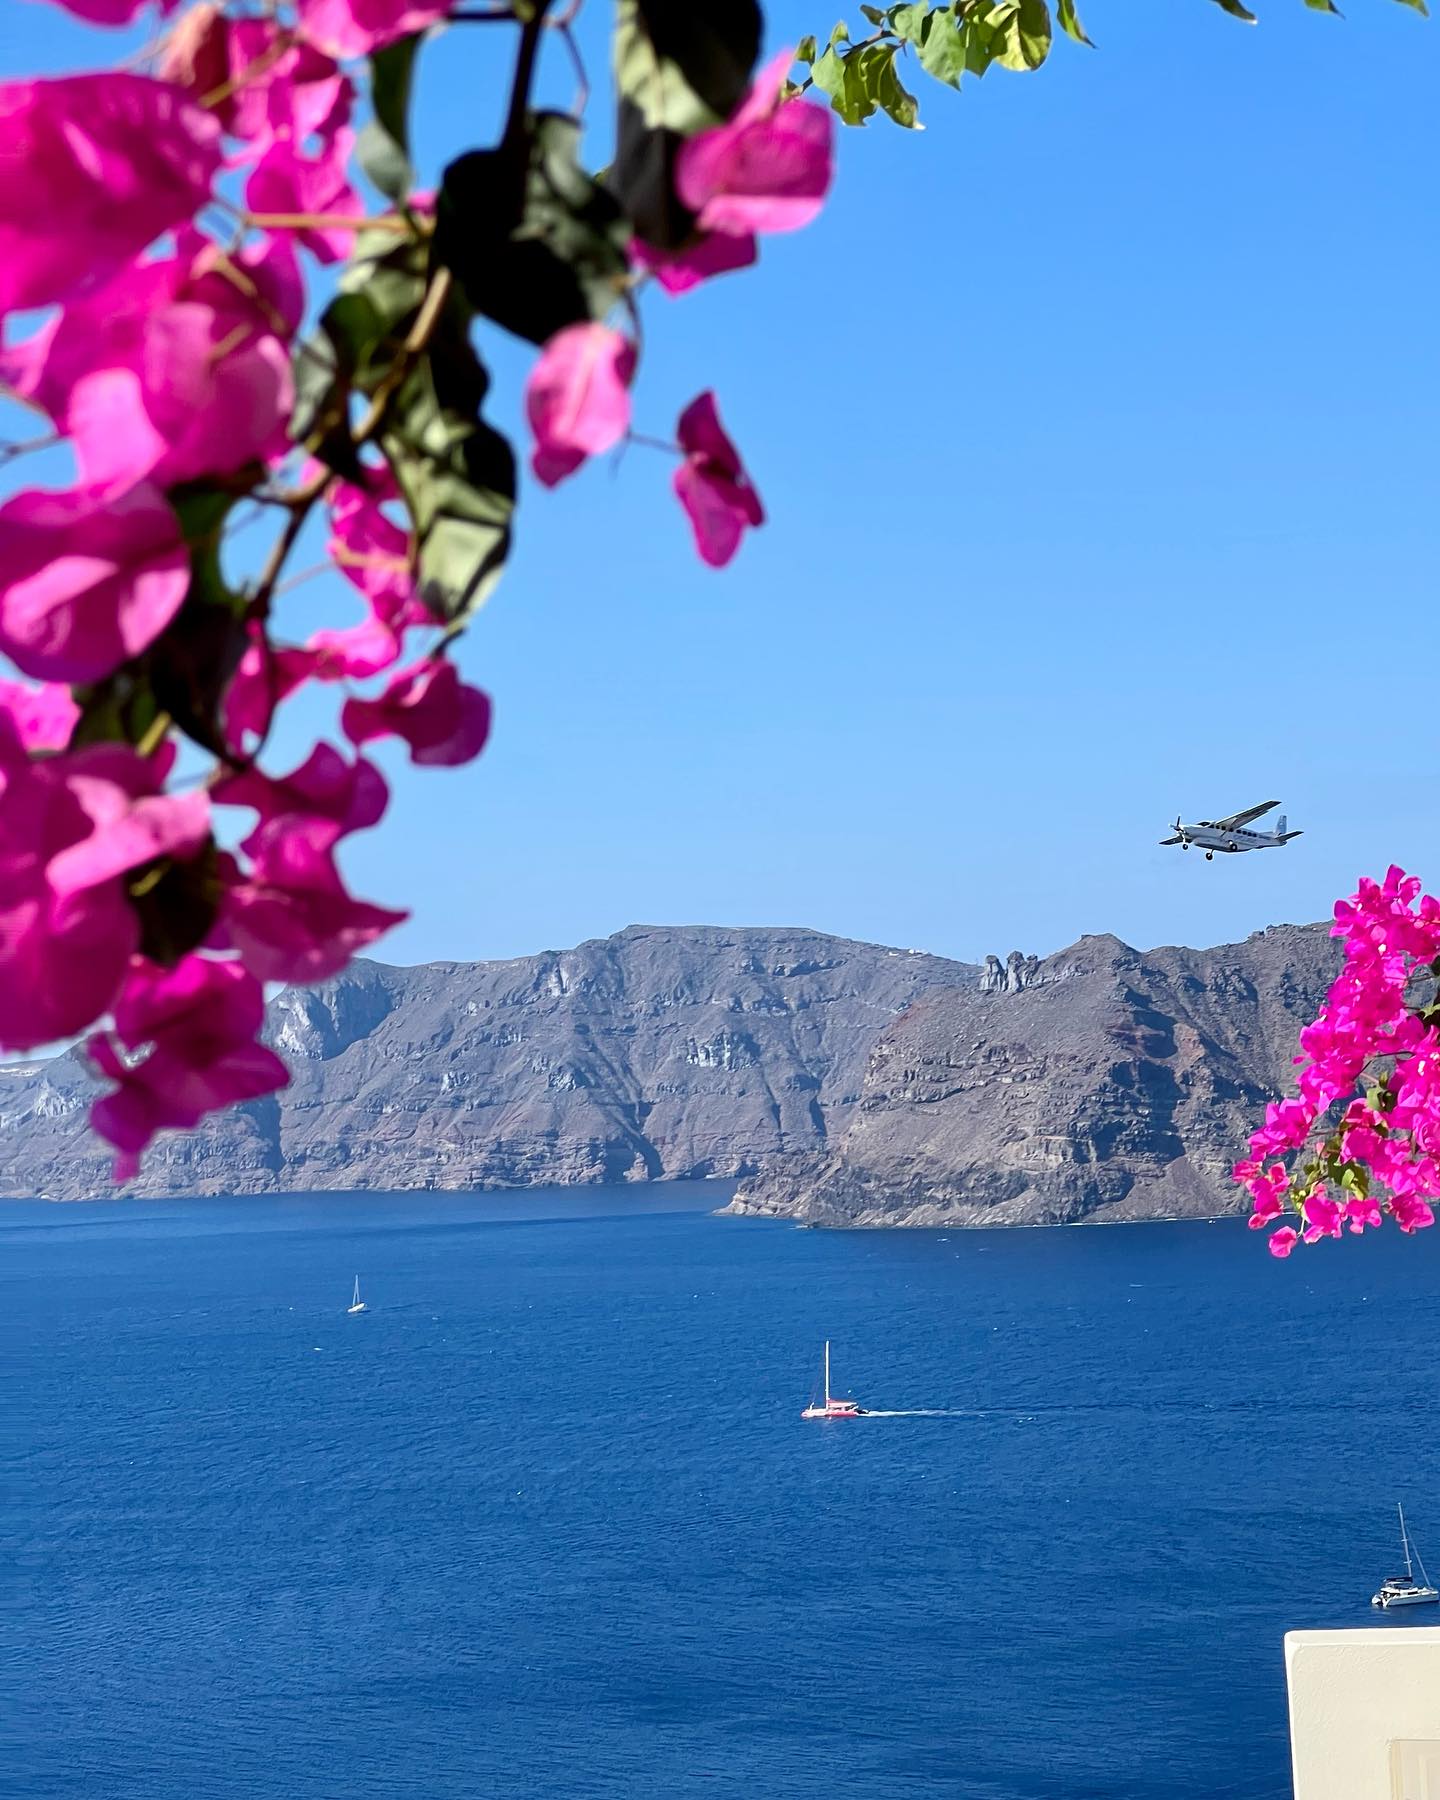 Welcome June🌸☀️! We look forward to welcoming you on board this summer ✈️🇬🇷 #flycycladic